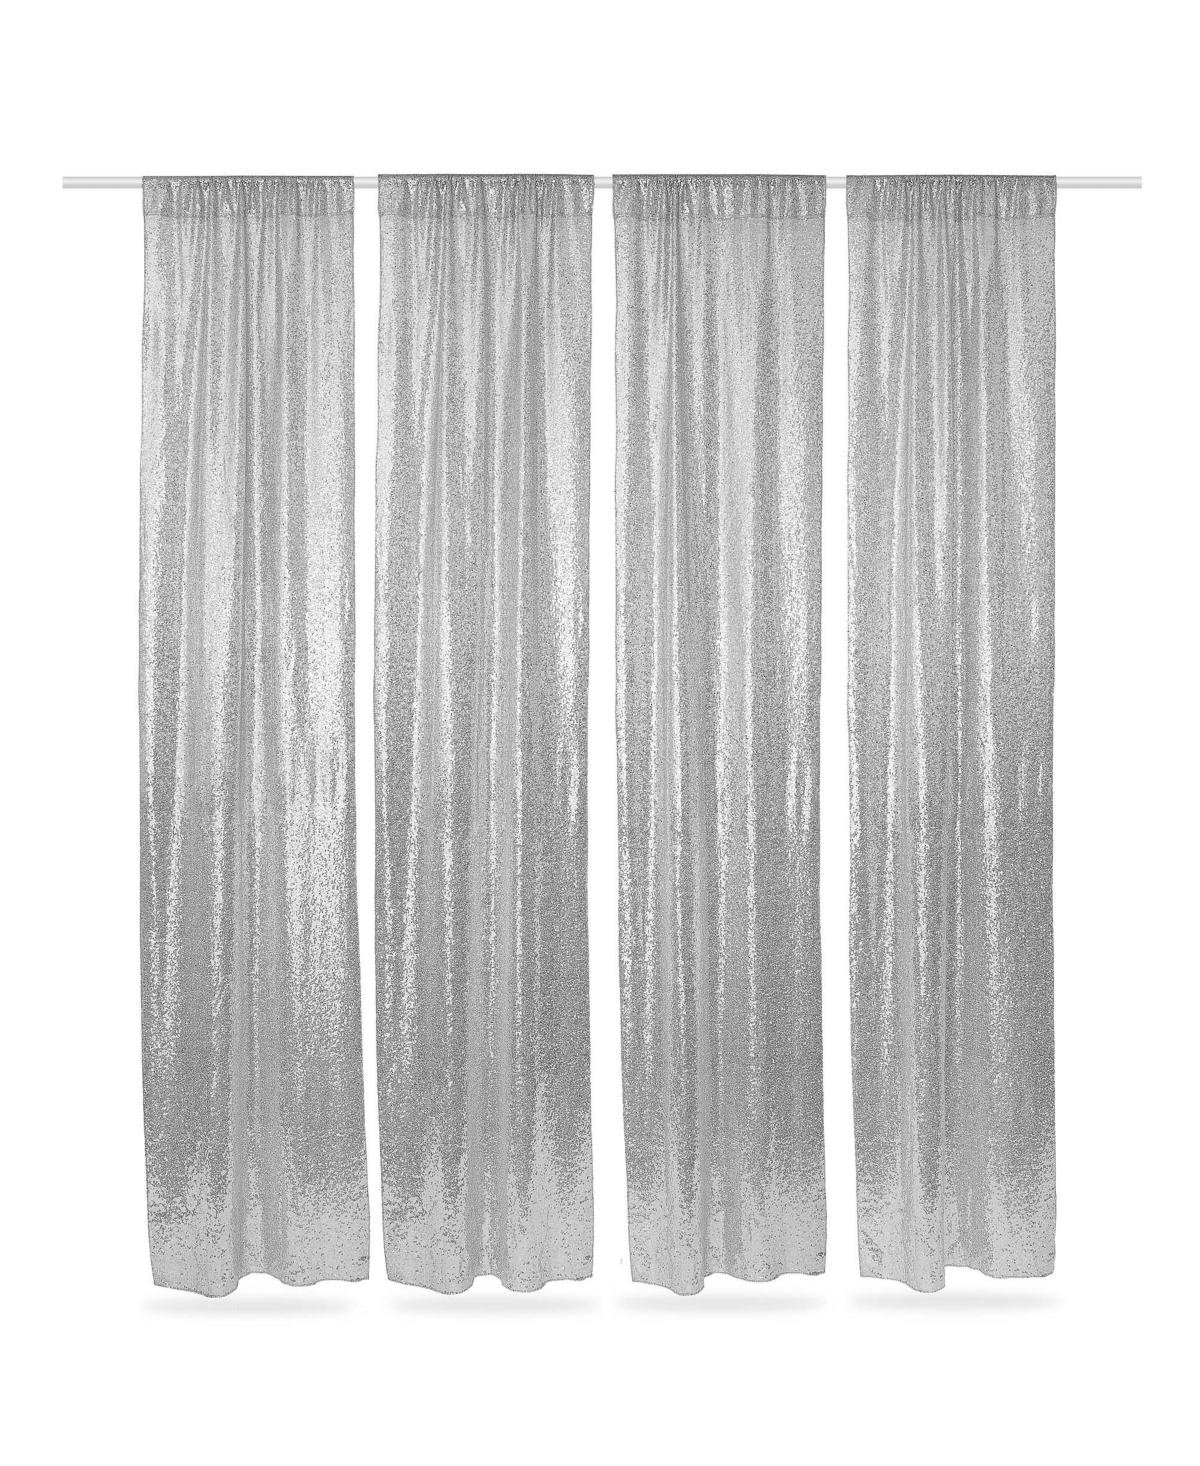 (Set of 4) Sequin Backdrop Curtains, 2ft x 8ft Silver Glitter Backgrounds - Silver